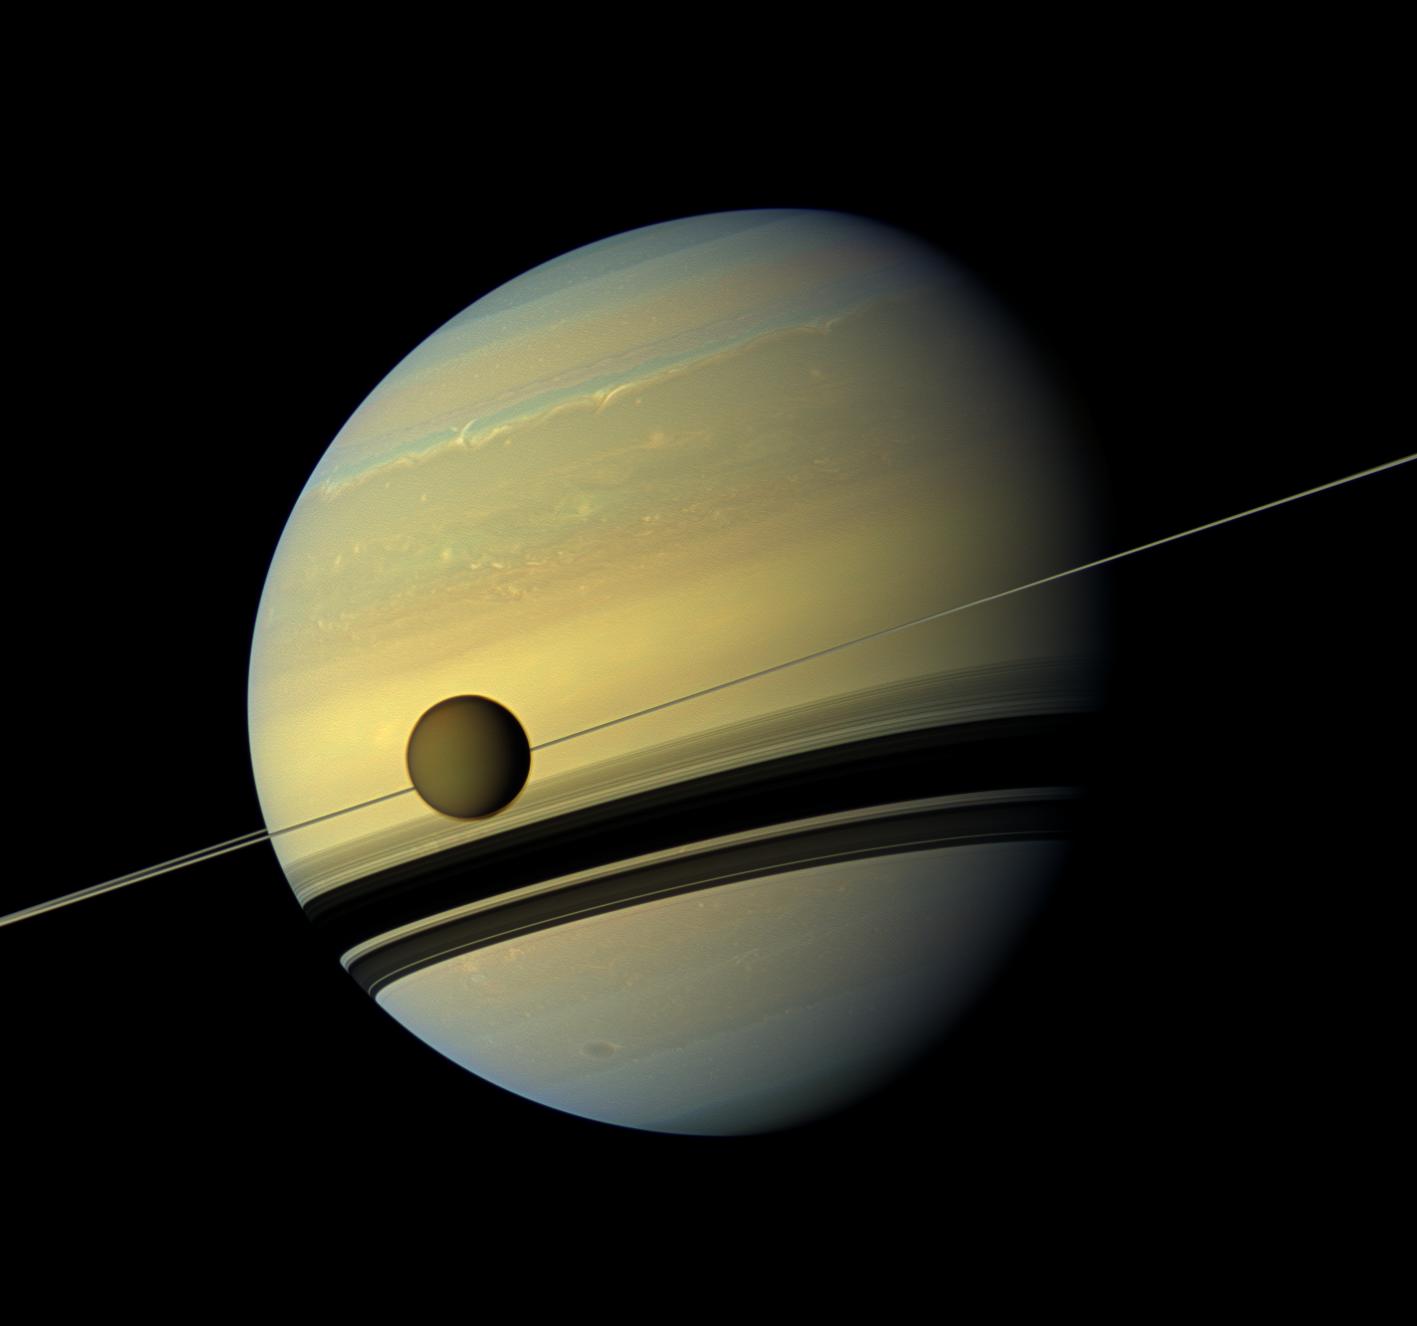 This Cassini image from 2012 shows Titan and its parent planet Saturn.